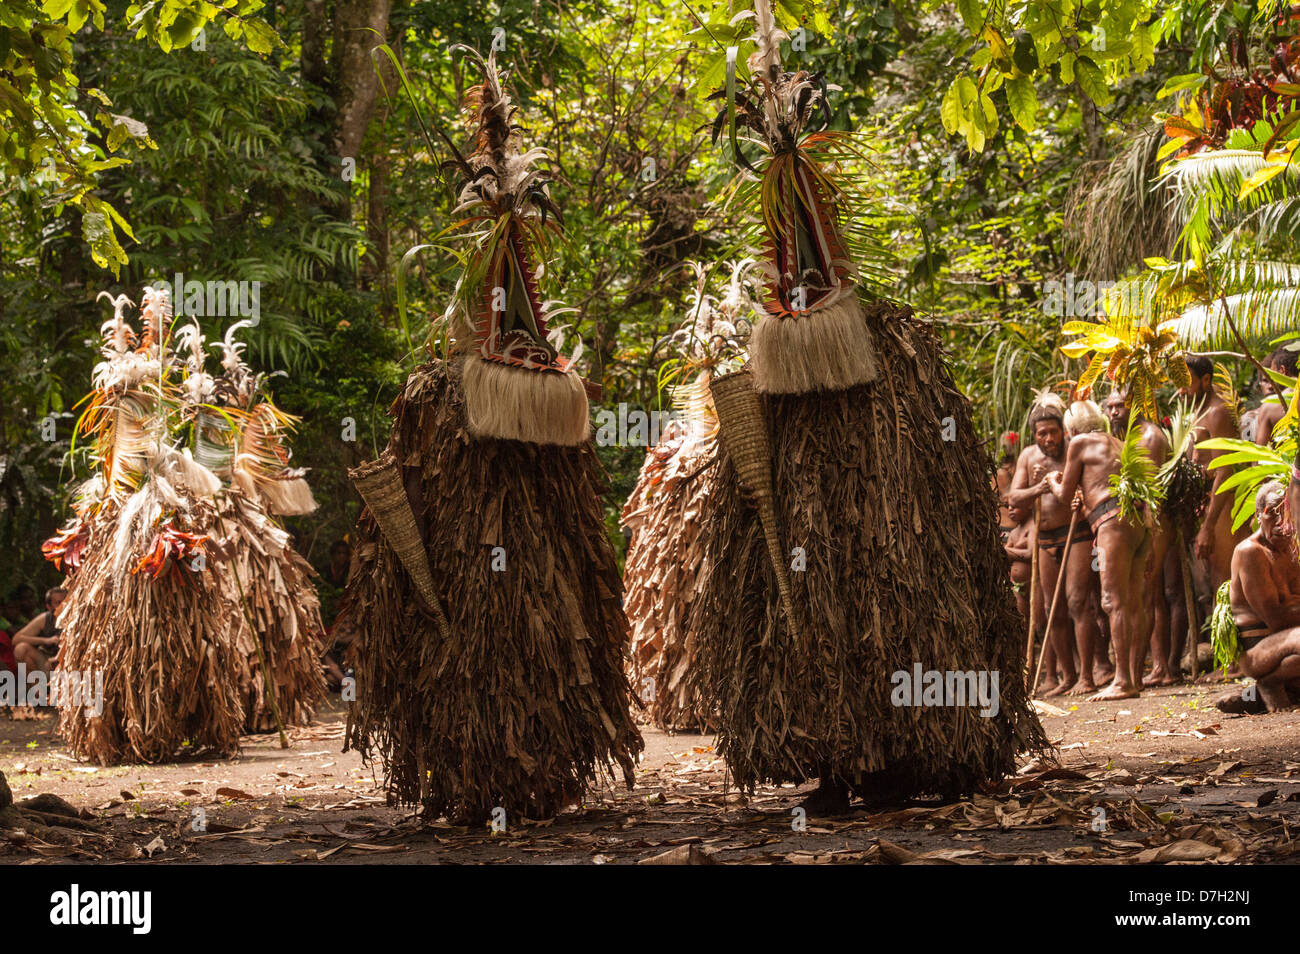 Rom Dancers on the last day of Ambrym's annual Back to My Roots festival of traditional culture, Vanuatu Stock Photo